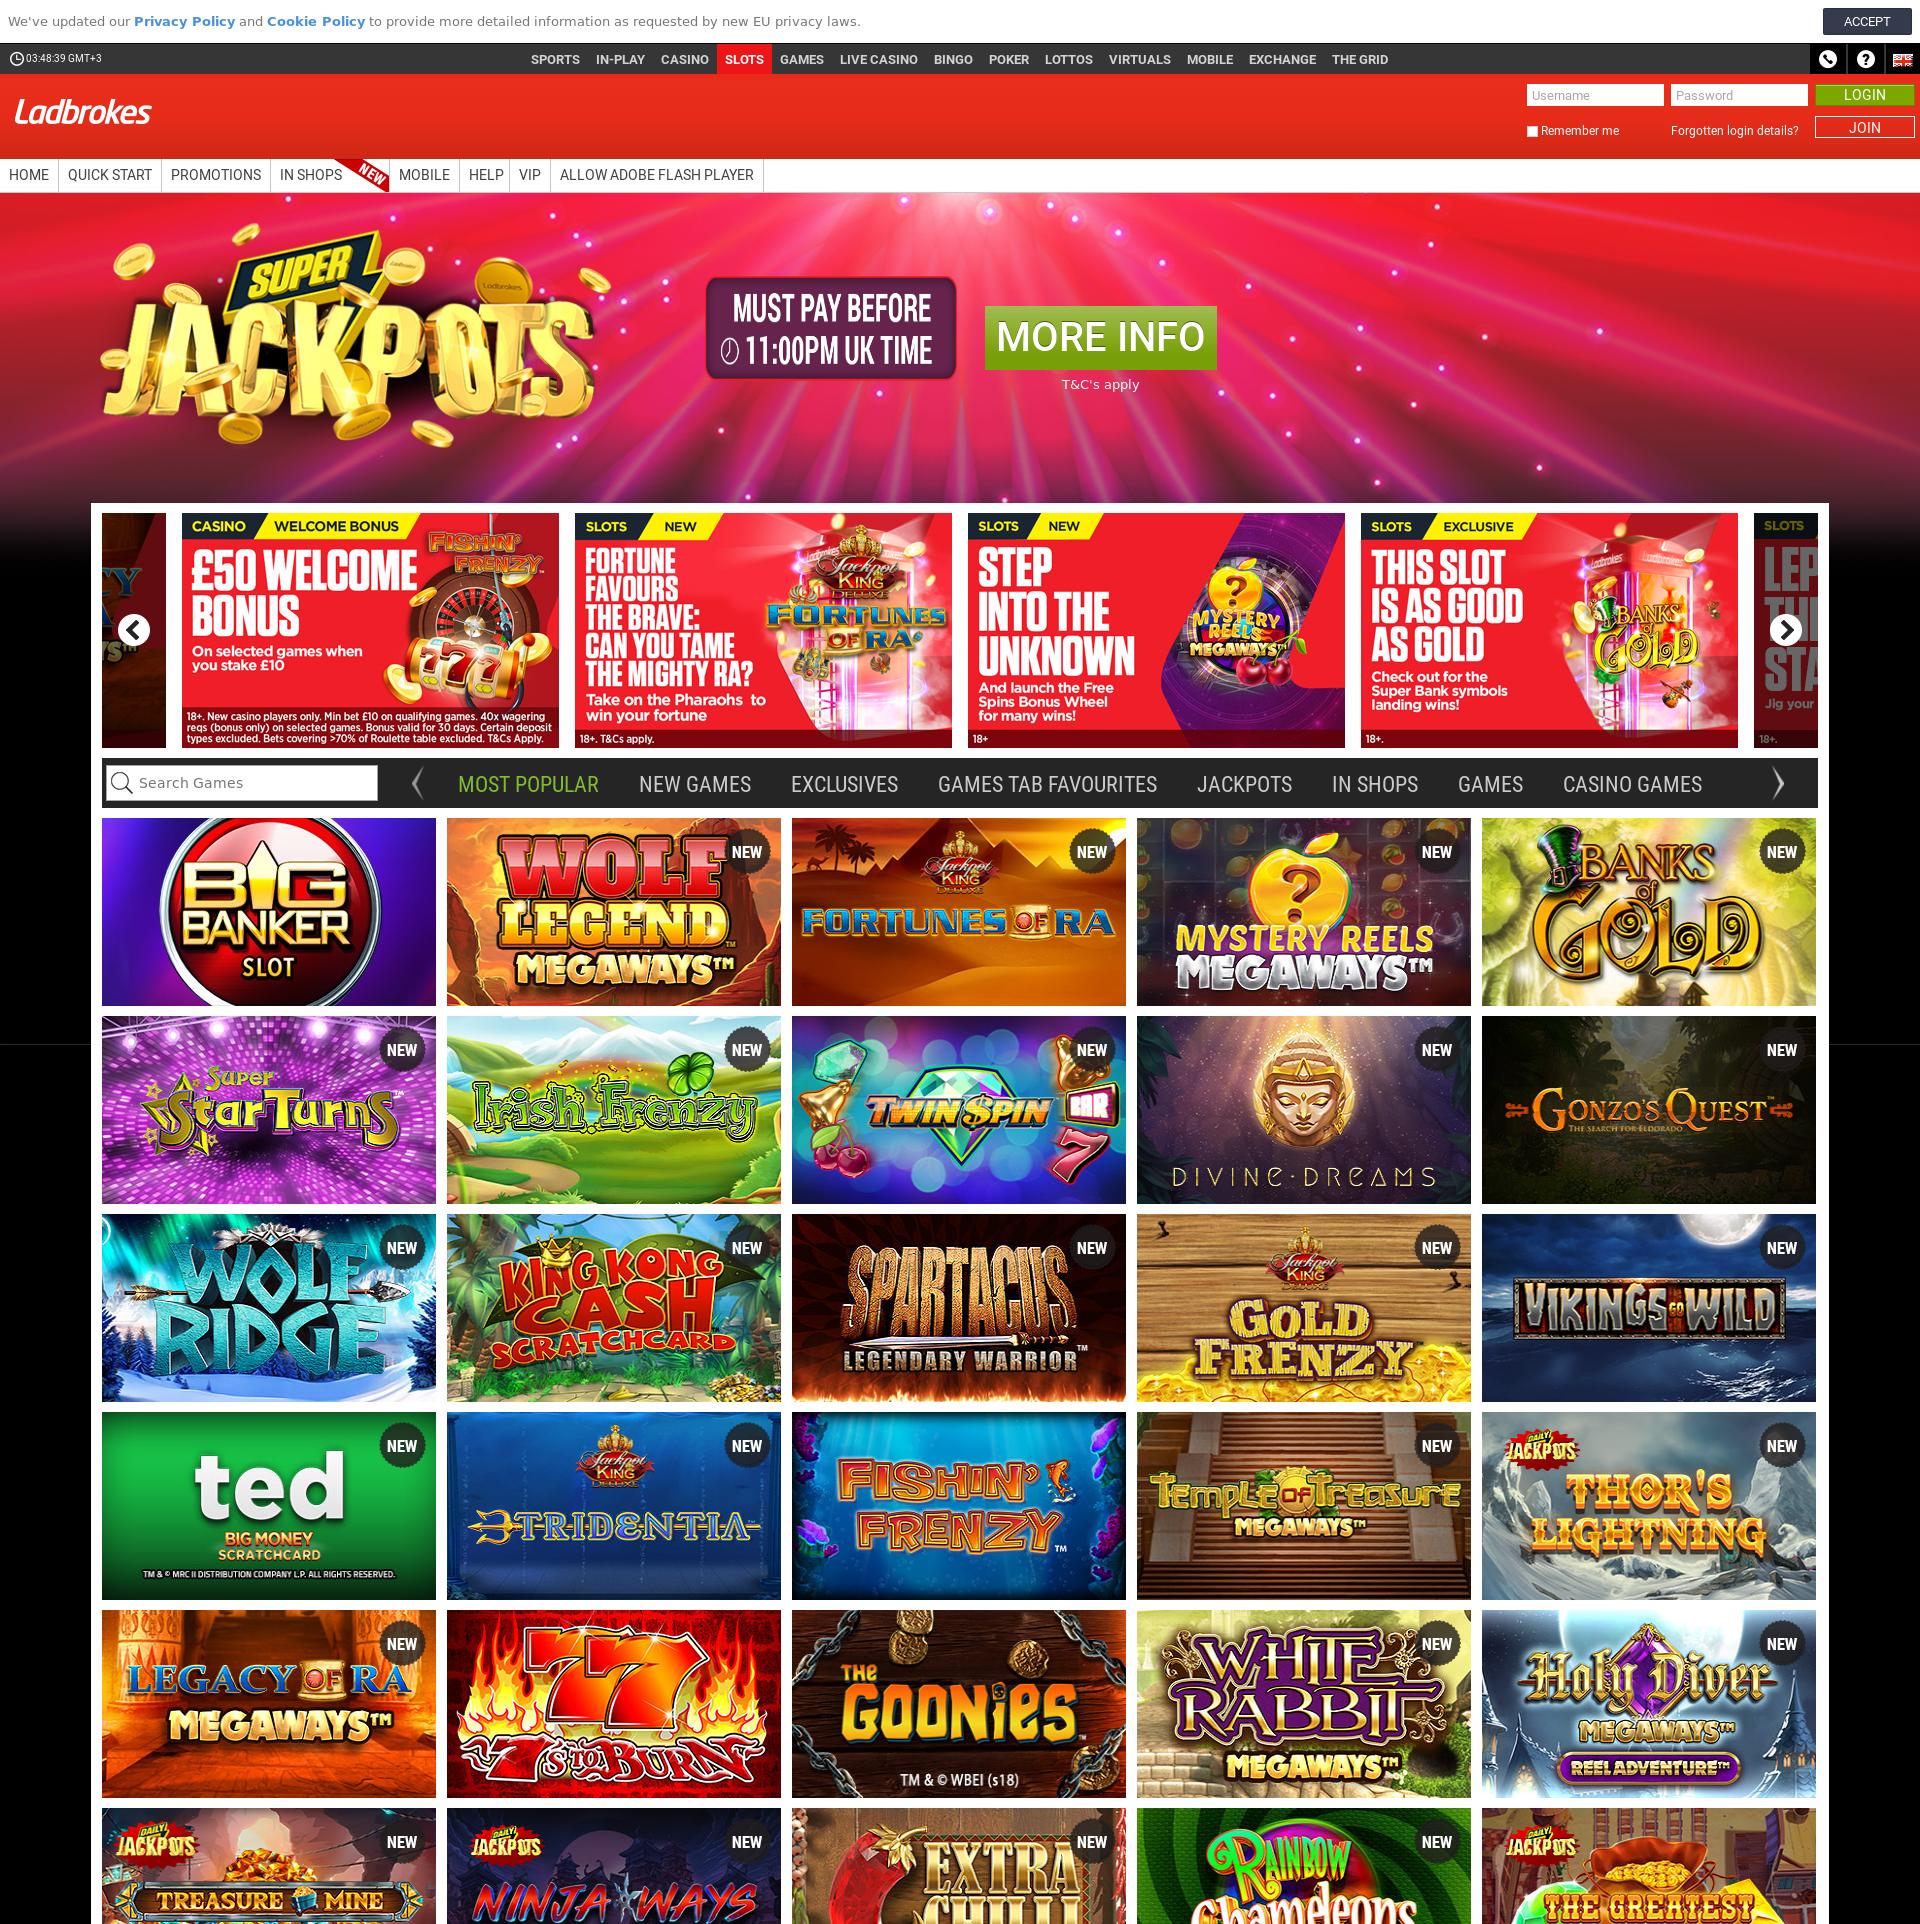 free roulette game online